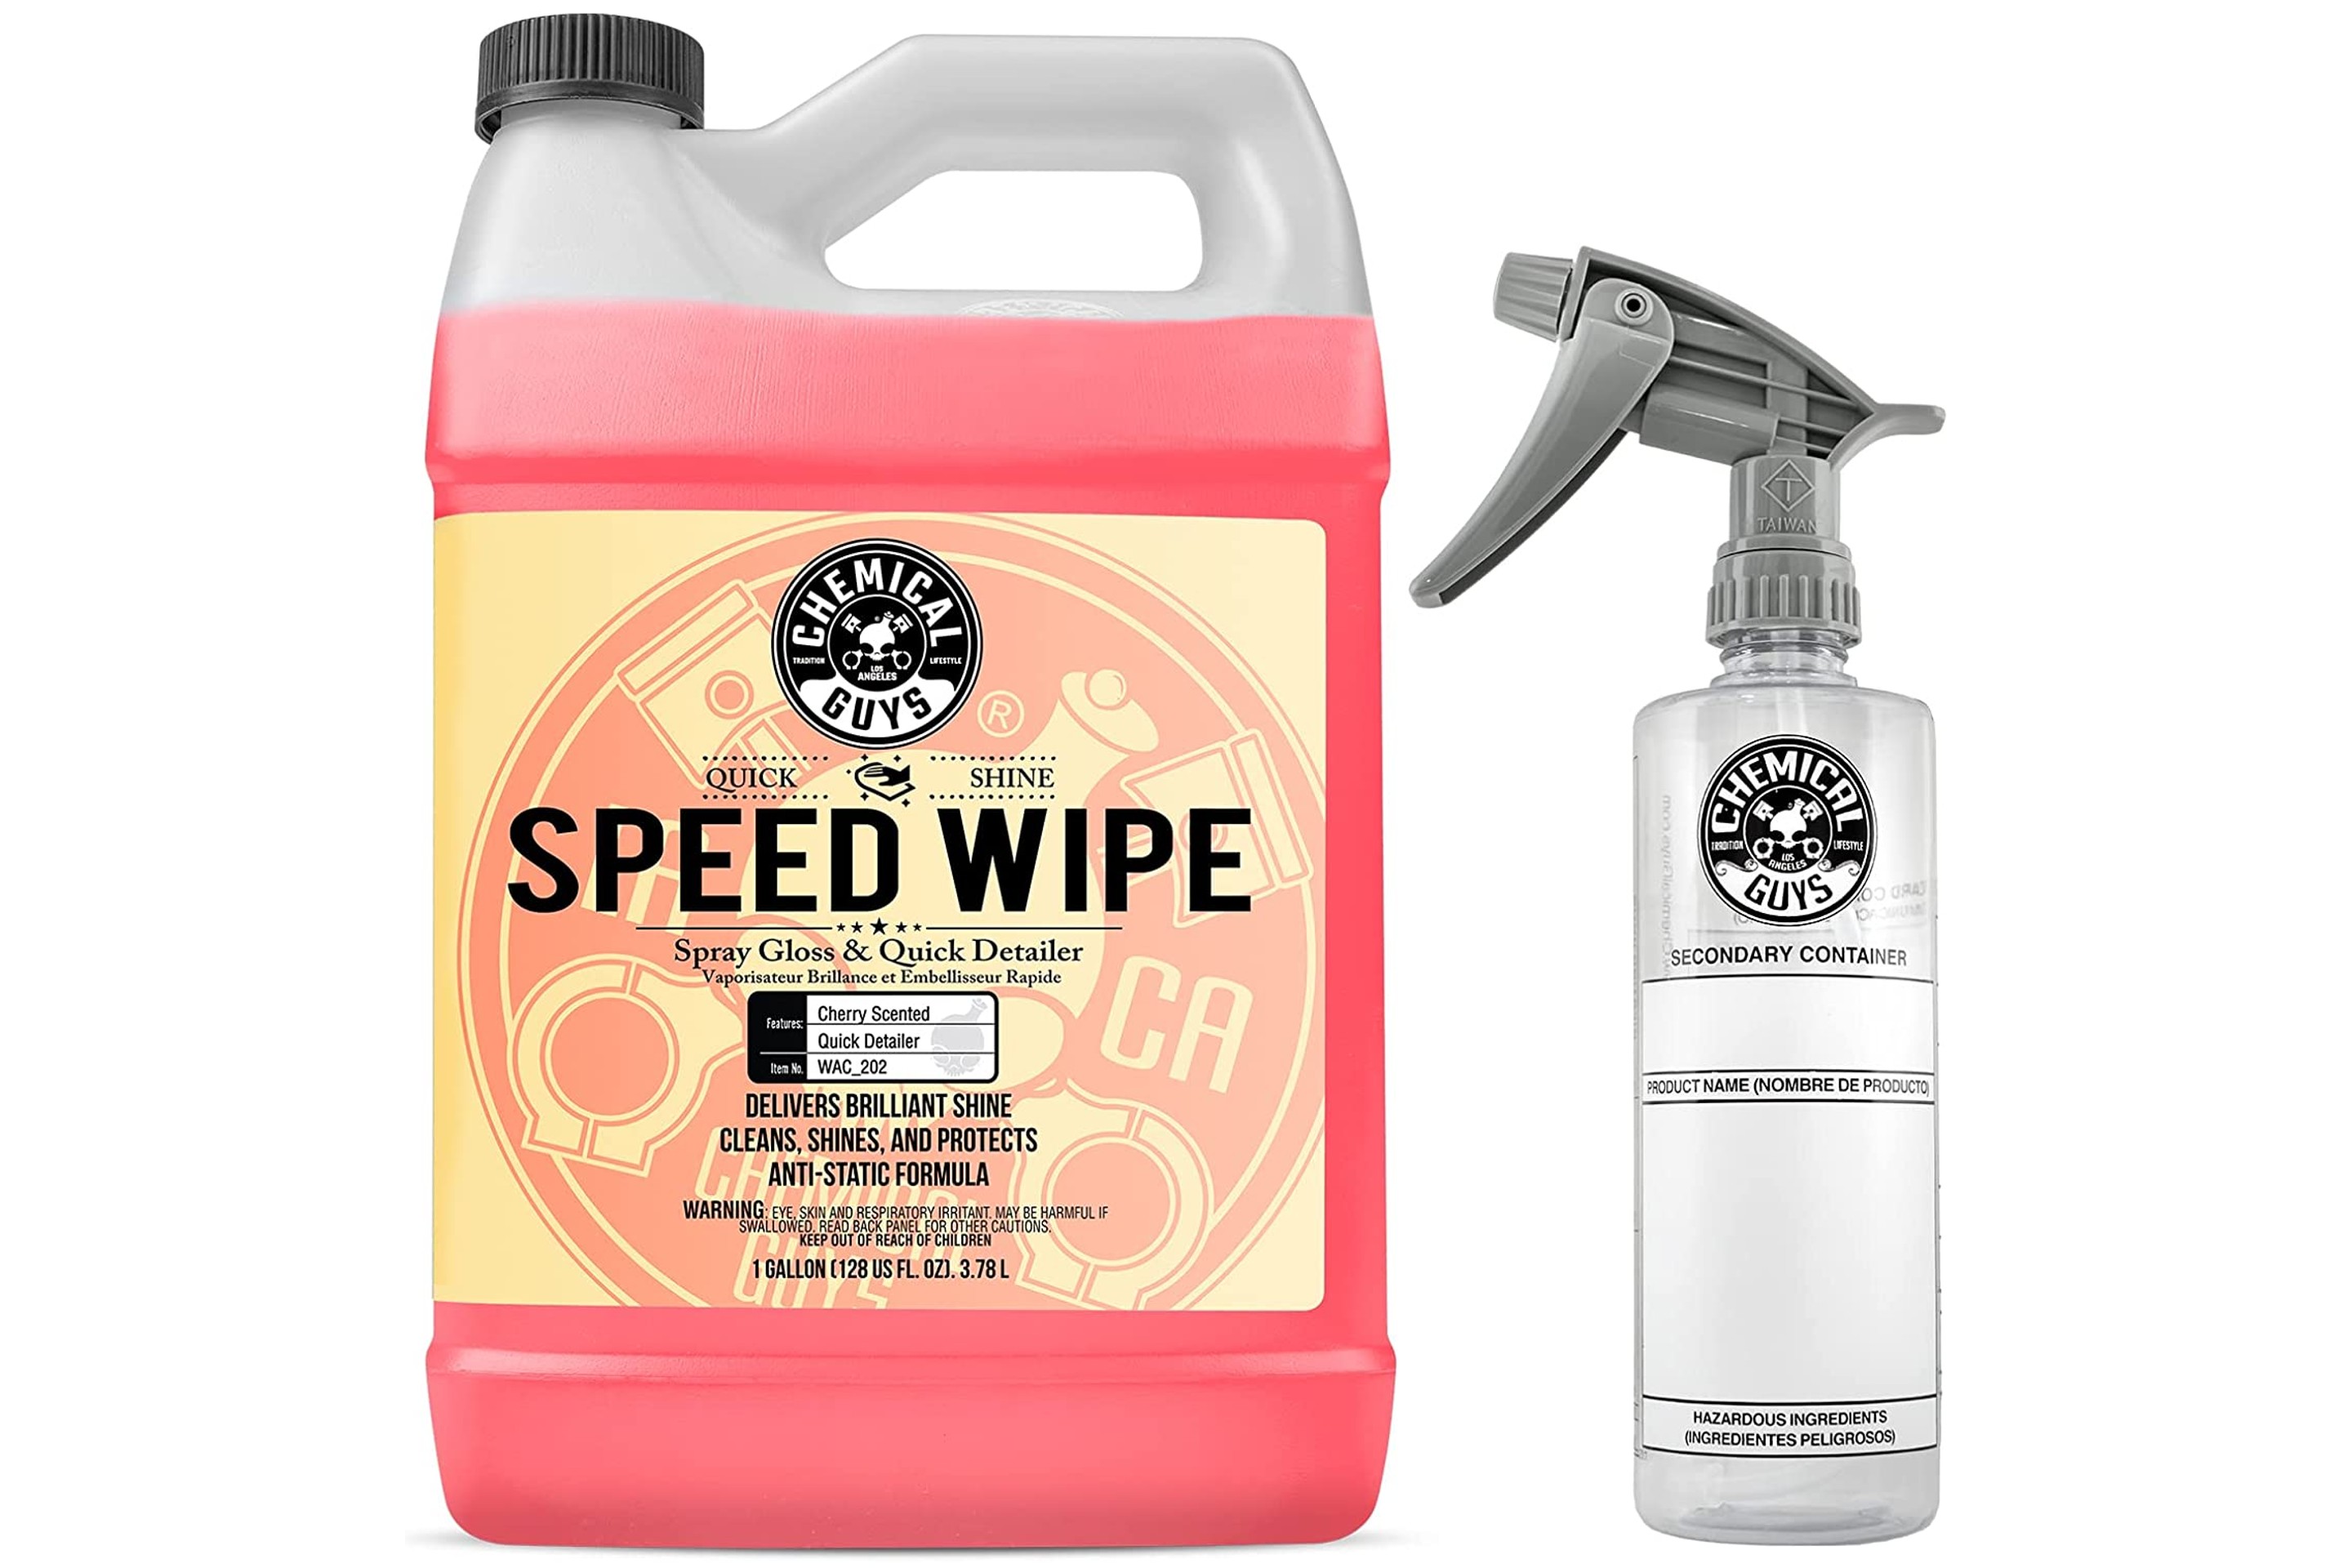 Save 25% on Car Cleaning Essentials